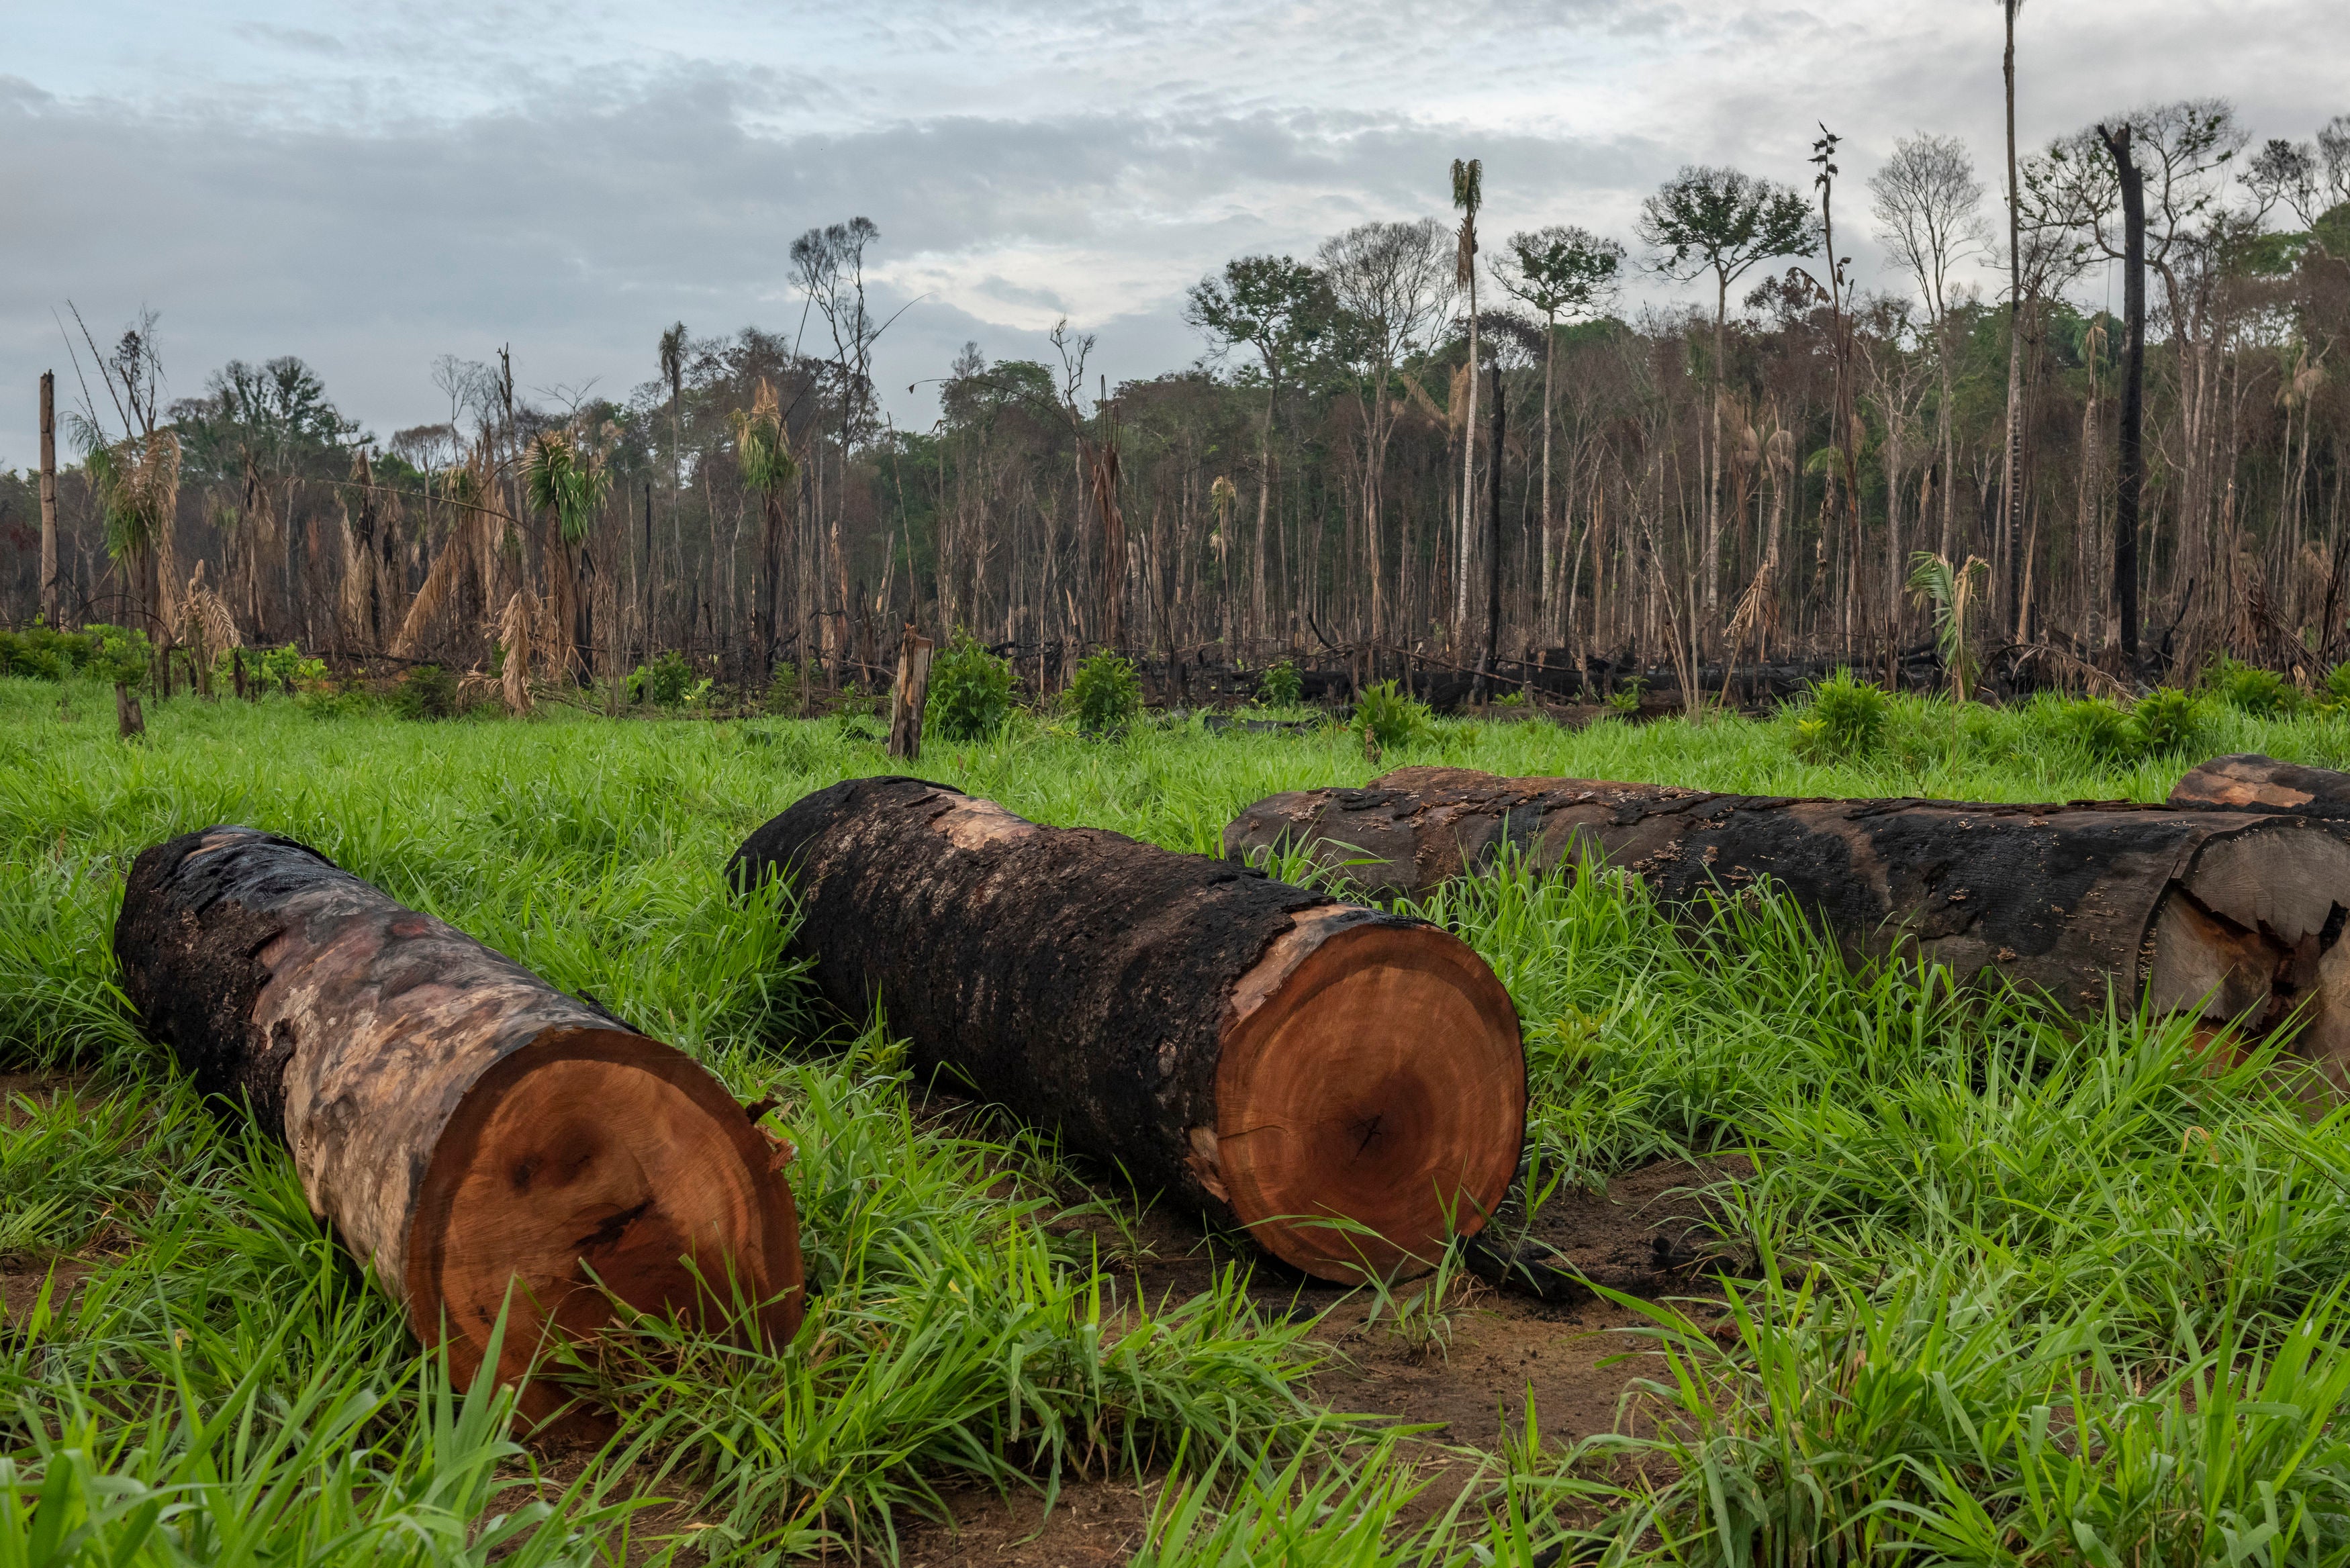 Logging is one of the extractive industries that are pushing tropical forests towards tipping points